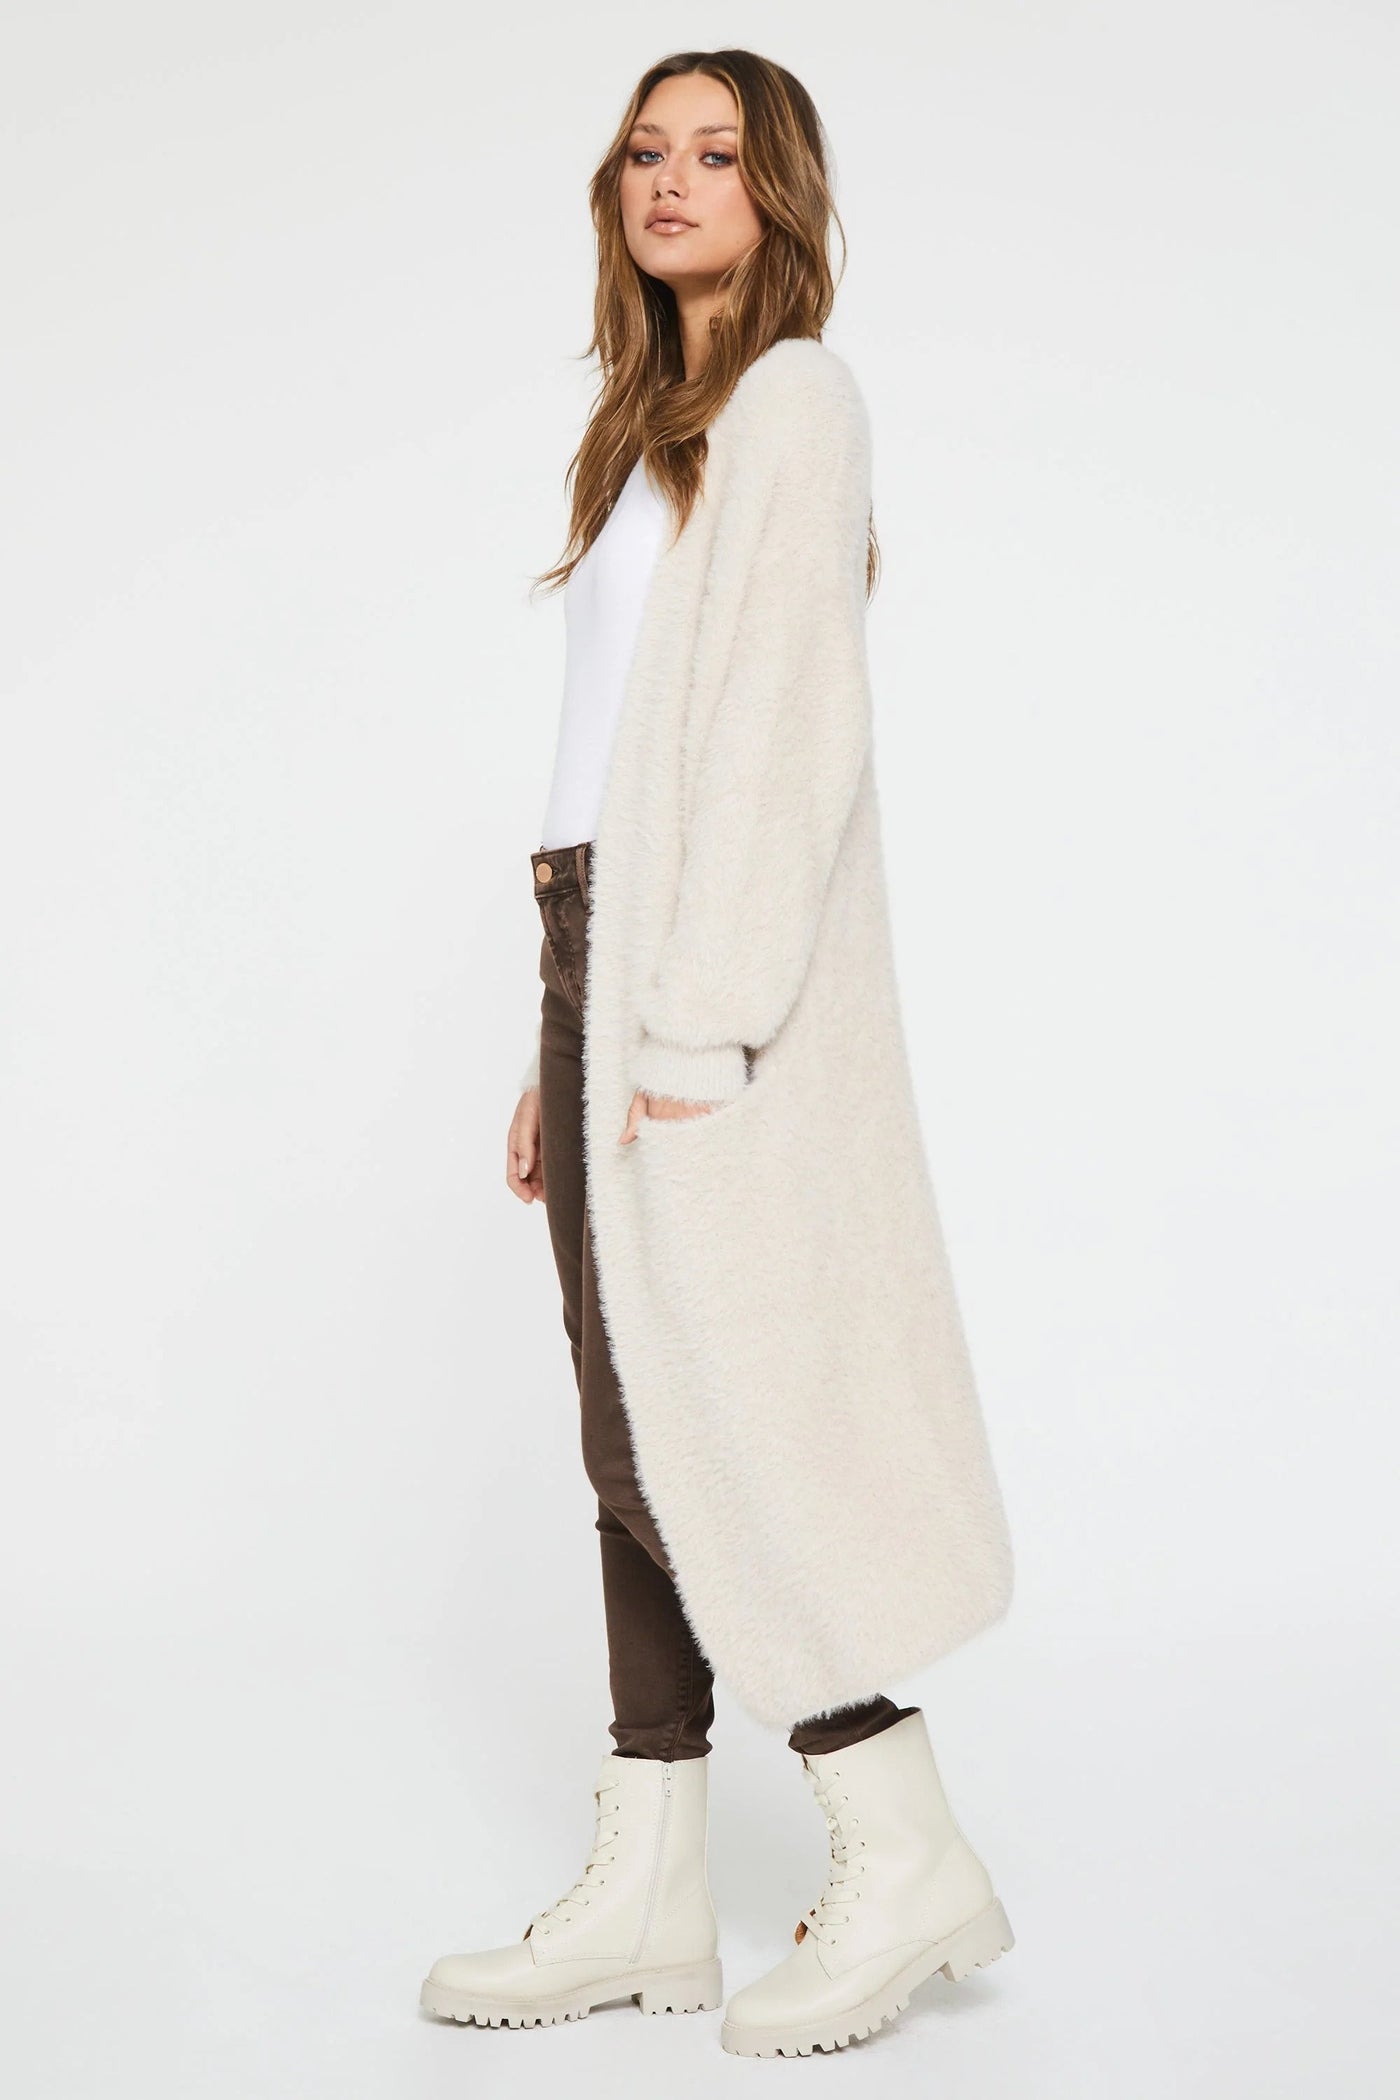 Another Love Electra Long Cardigan Side.